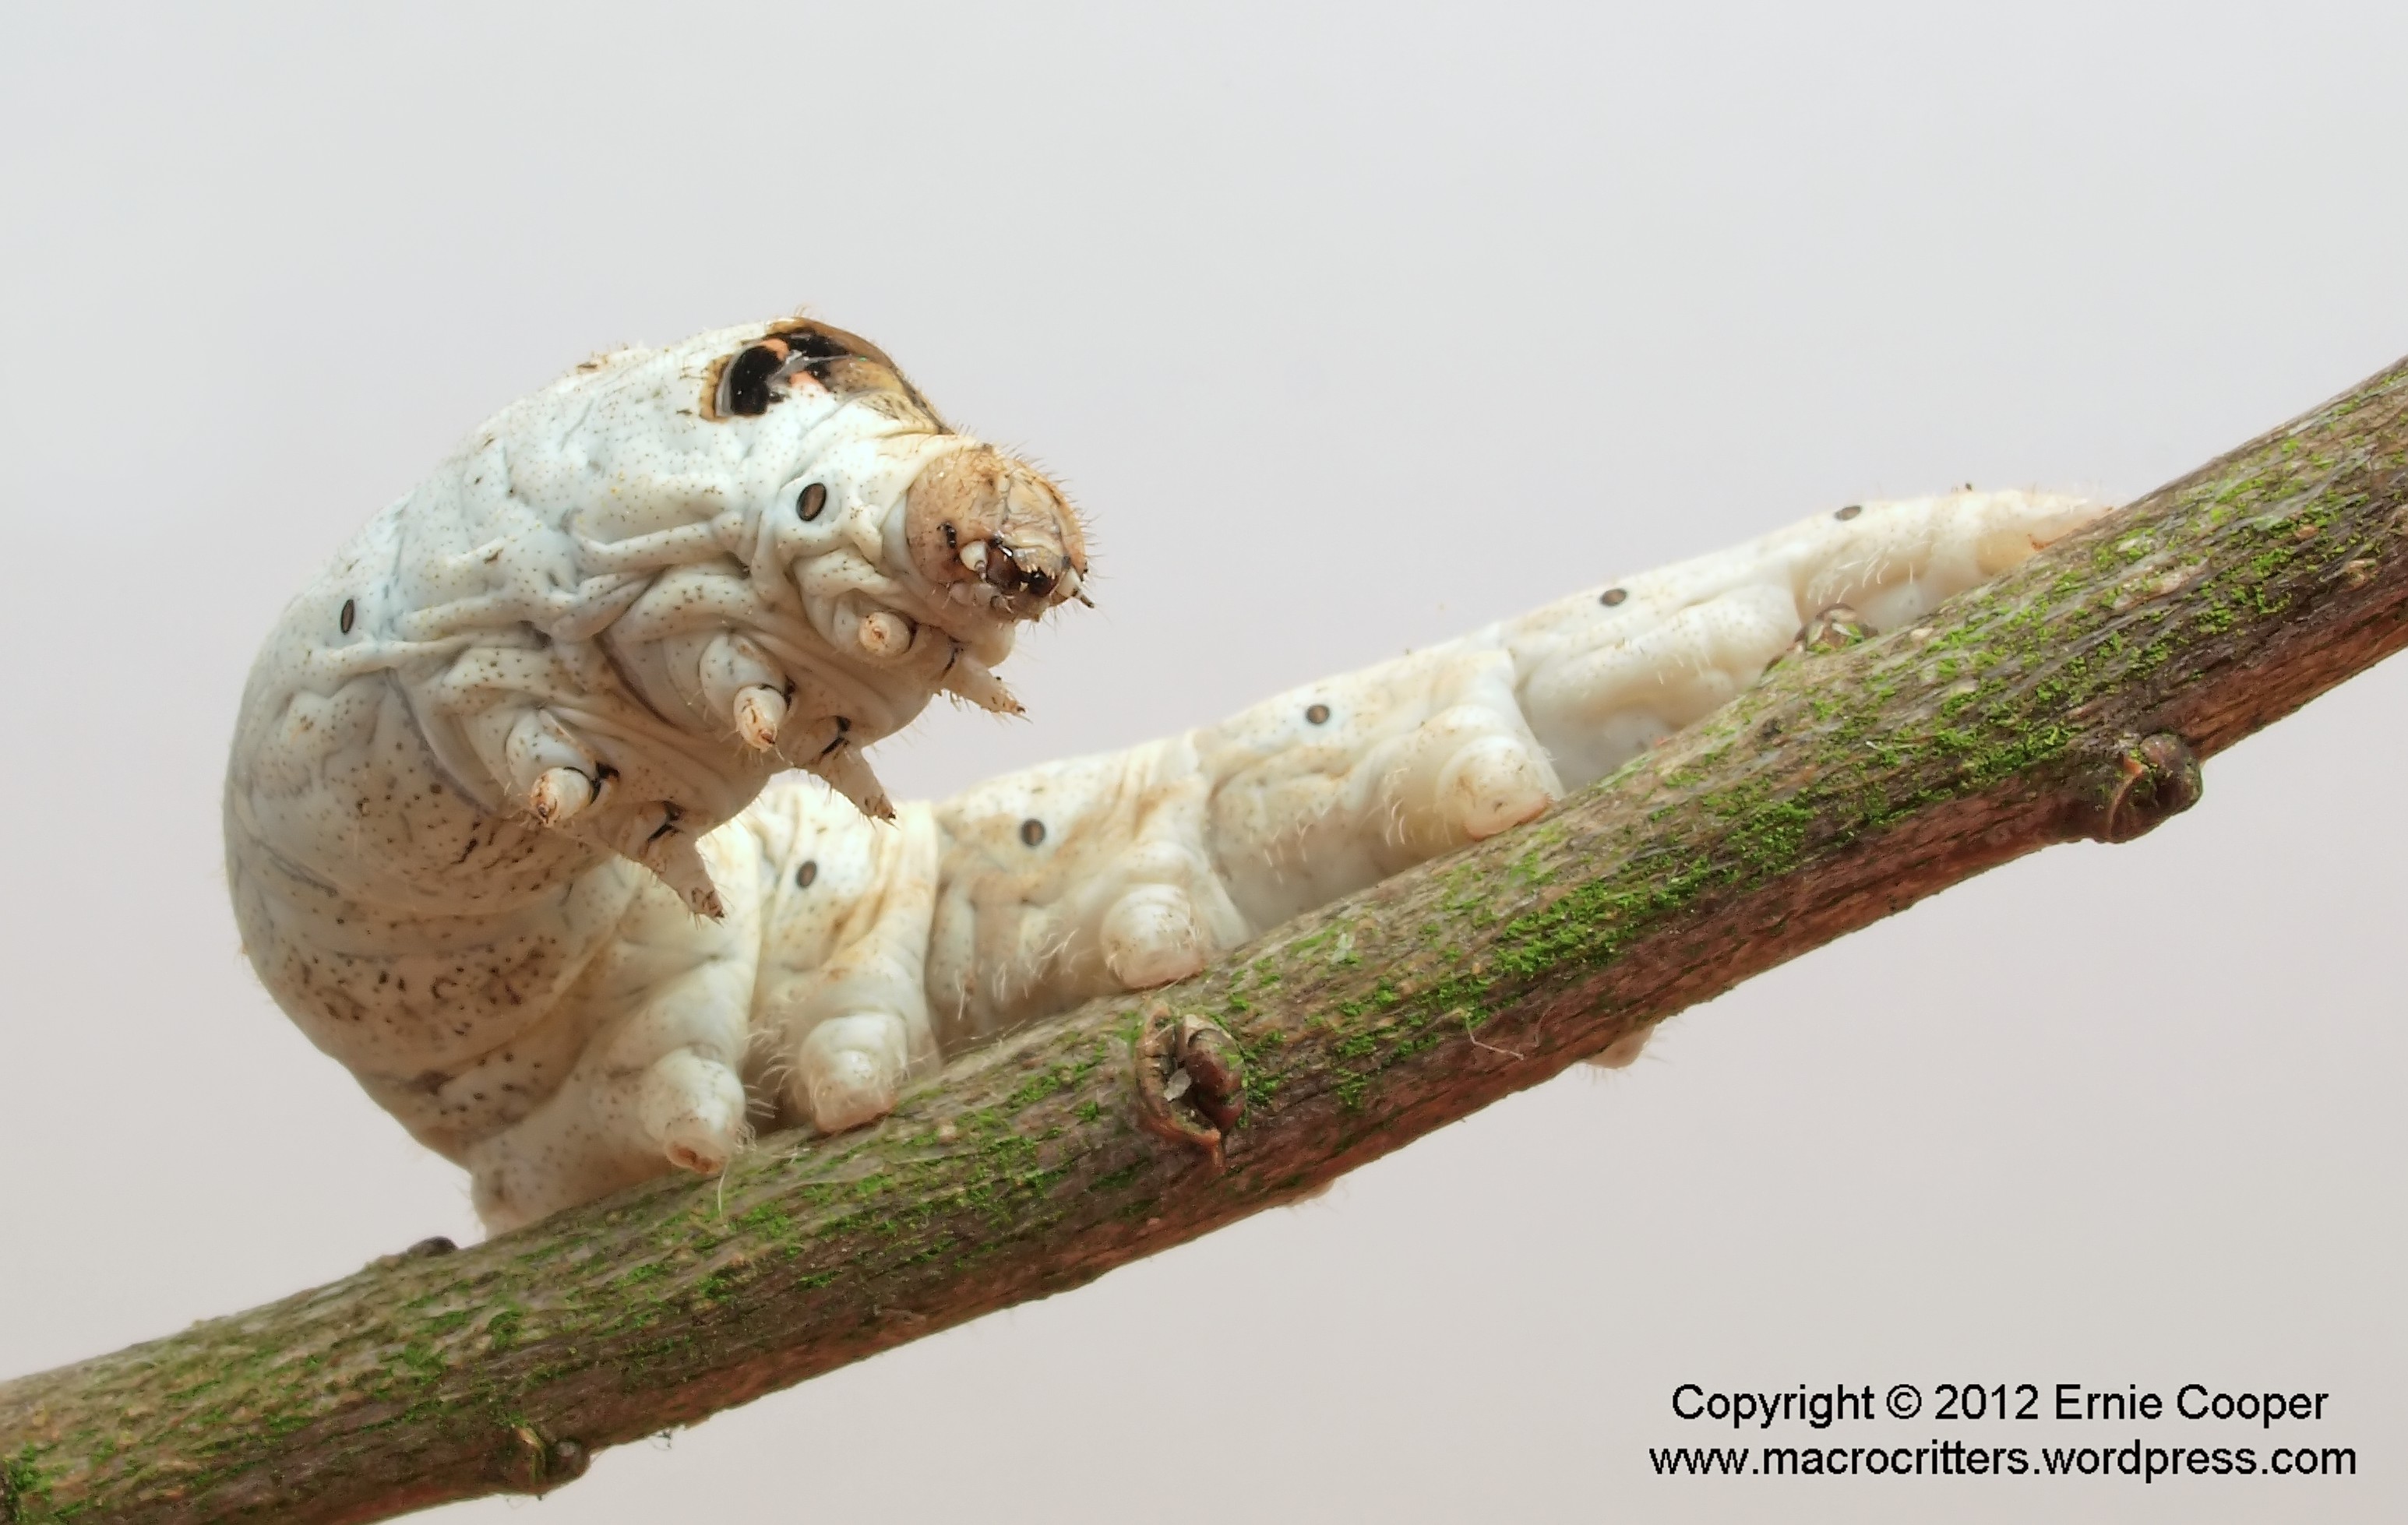 Photographing down the food web: silkworms (Bombyx mori) | macrocritters